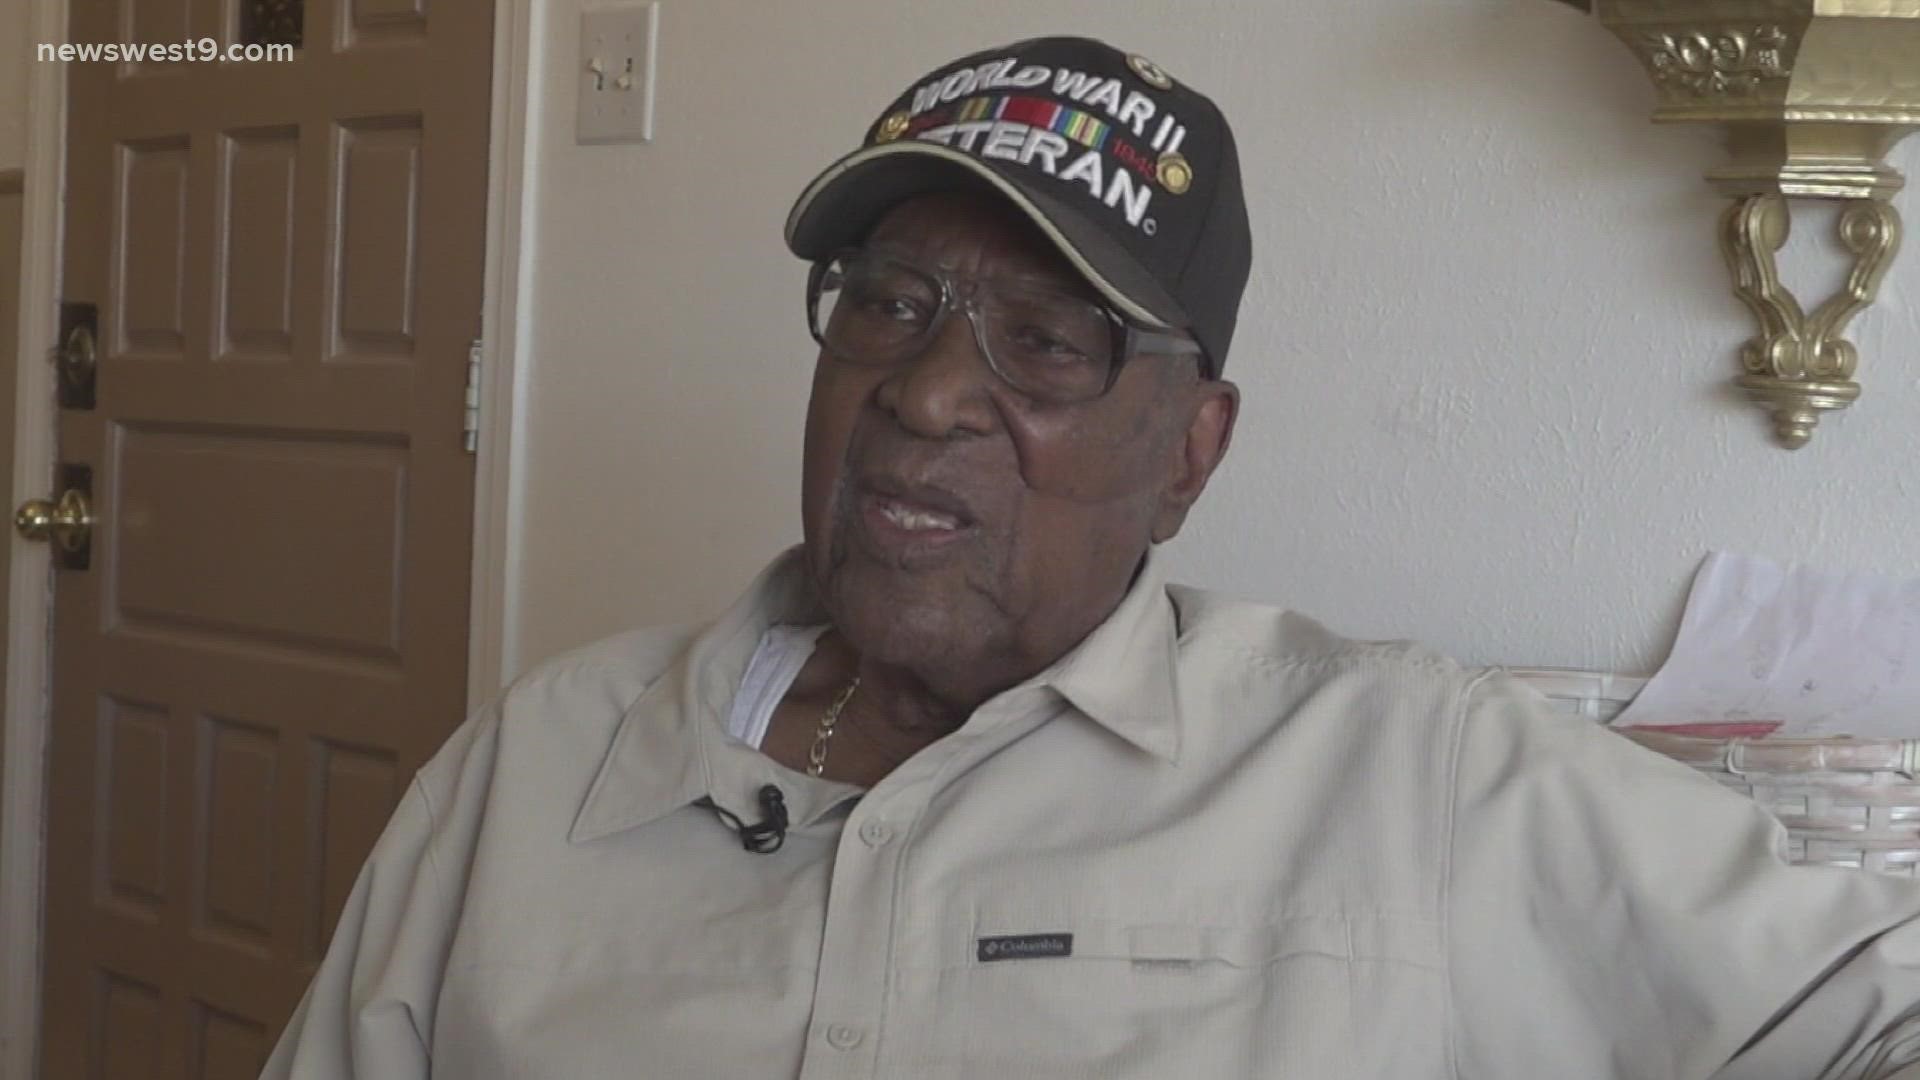 MJ Dinkins is a 96-year-old World War II veteran who's always on the go and cherishes the time he can spend with other servicemen and women like himself.